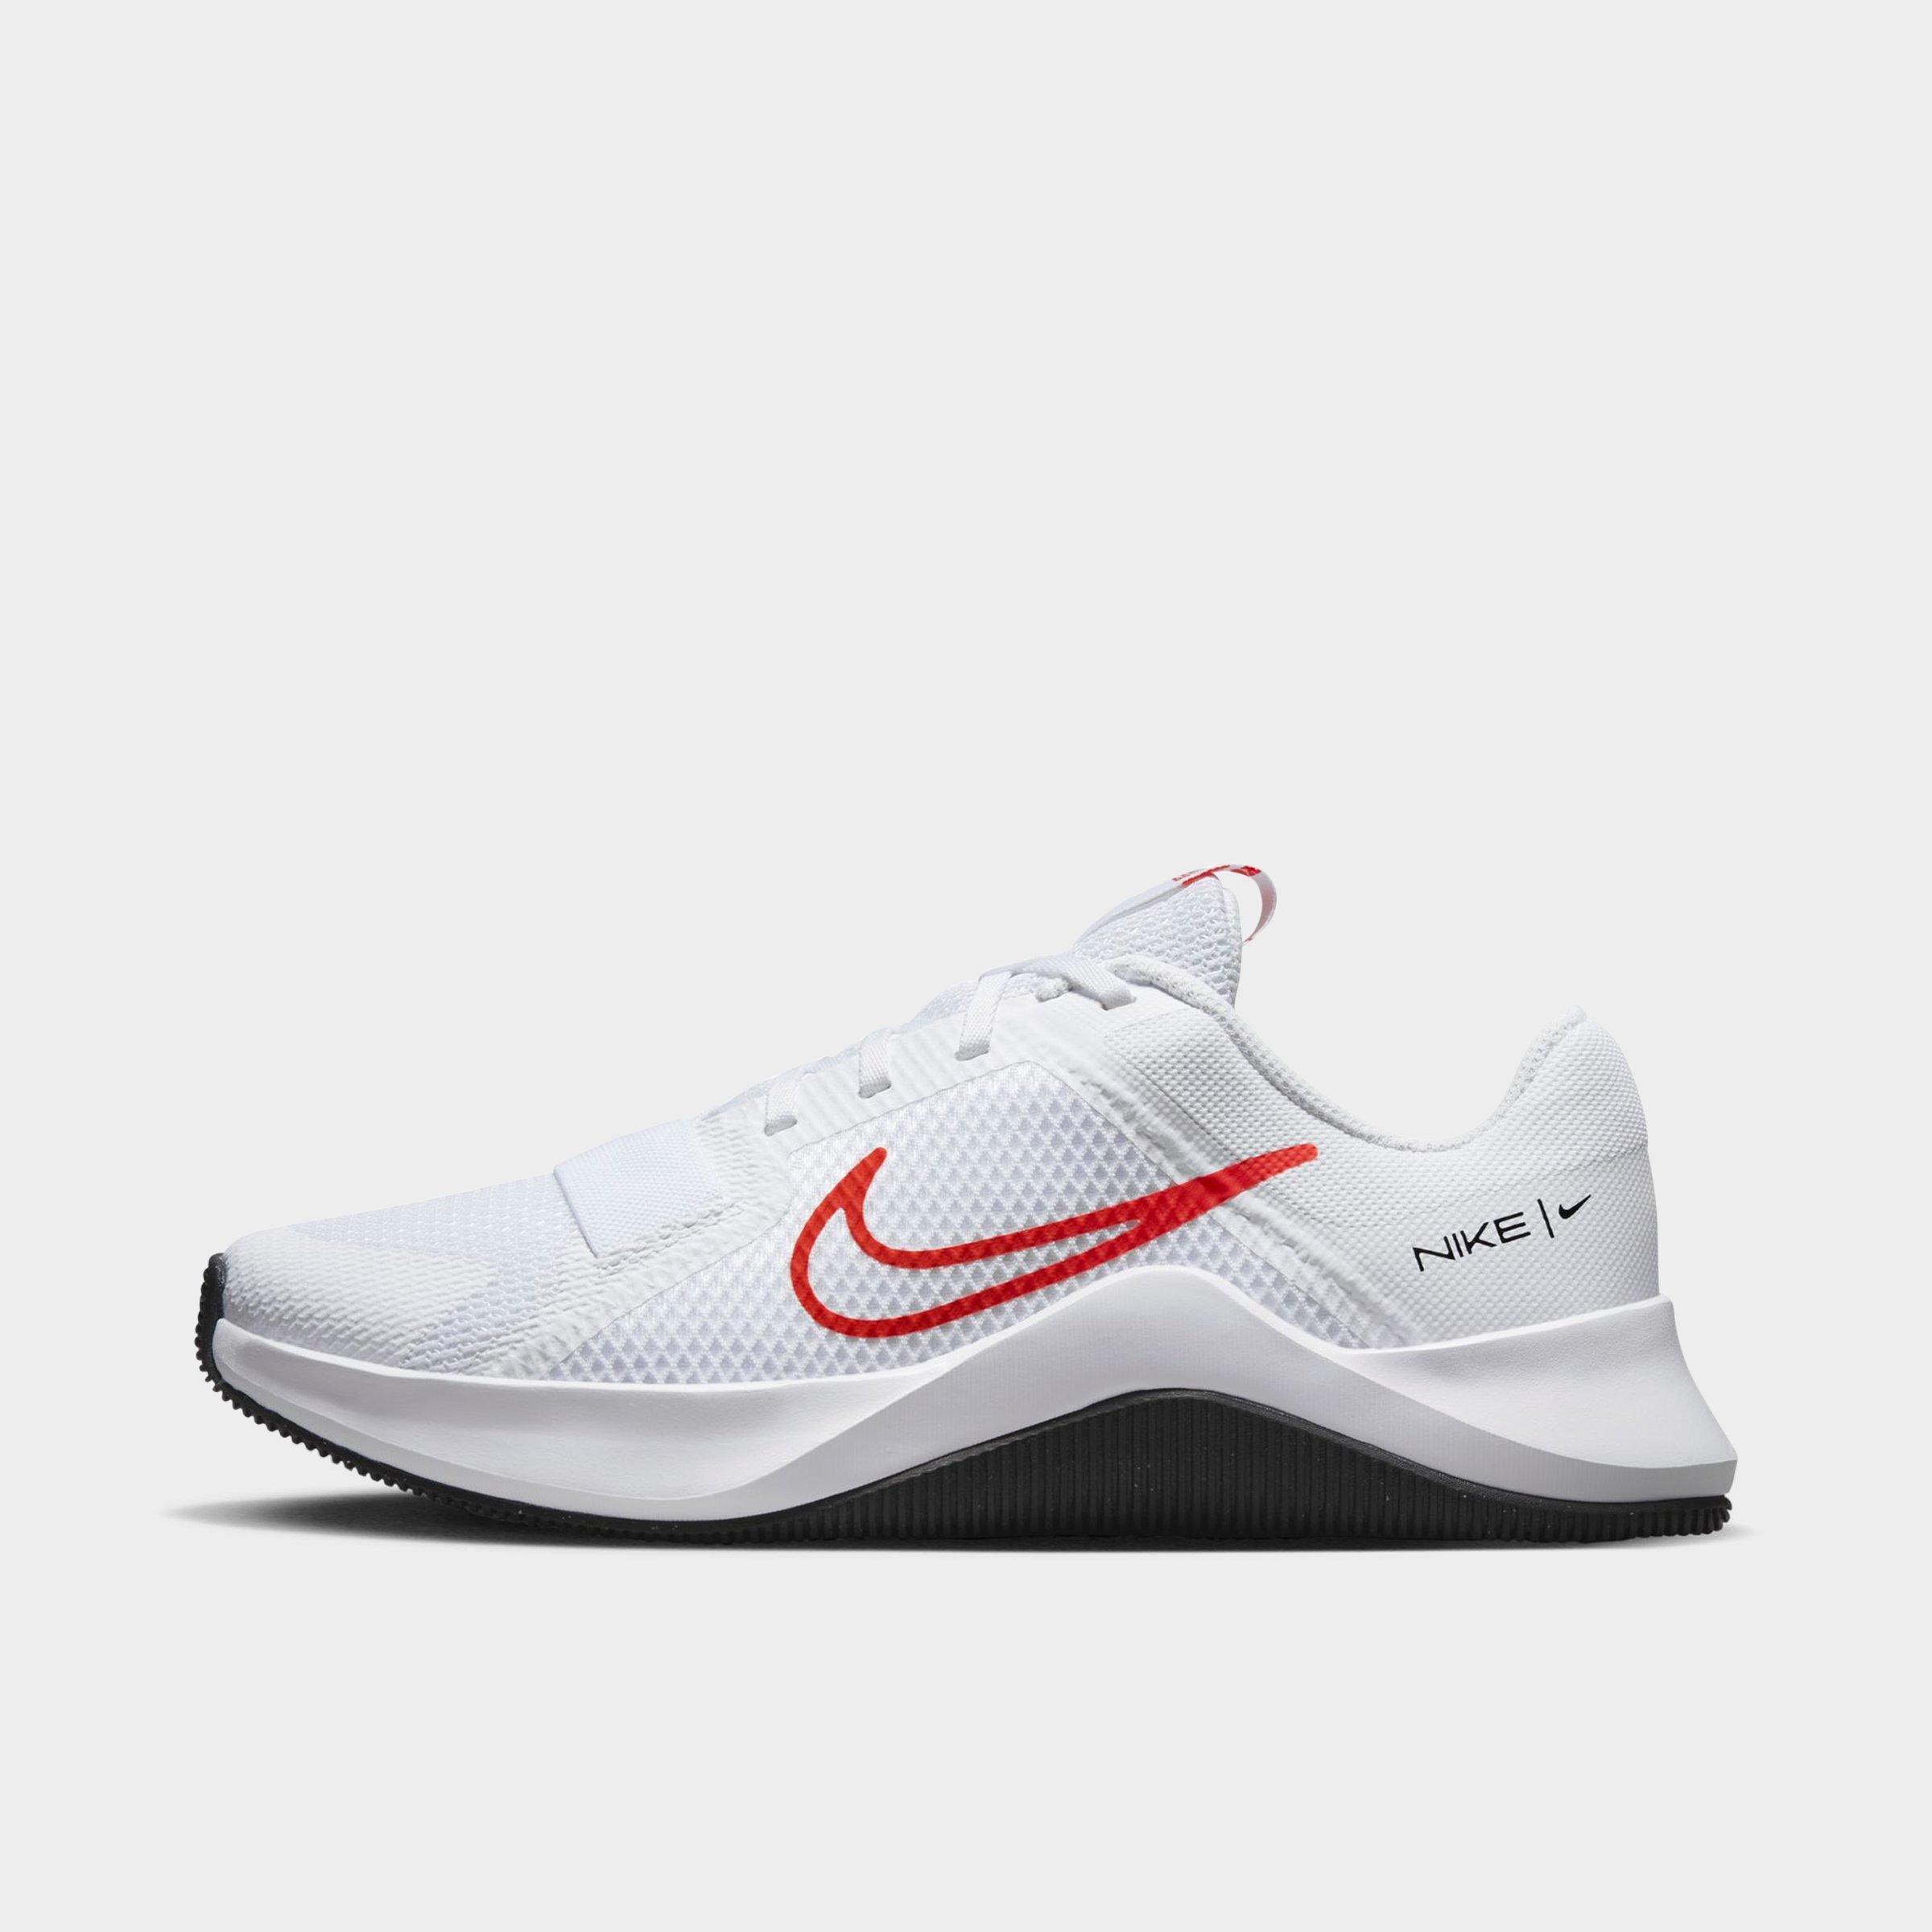 Nike Women's Mc Trainer 2 Training Shoes In White/black/picante Red